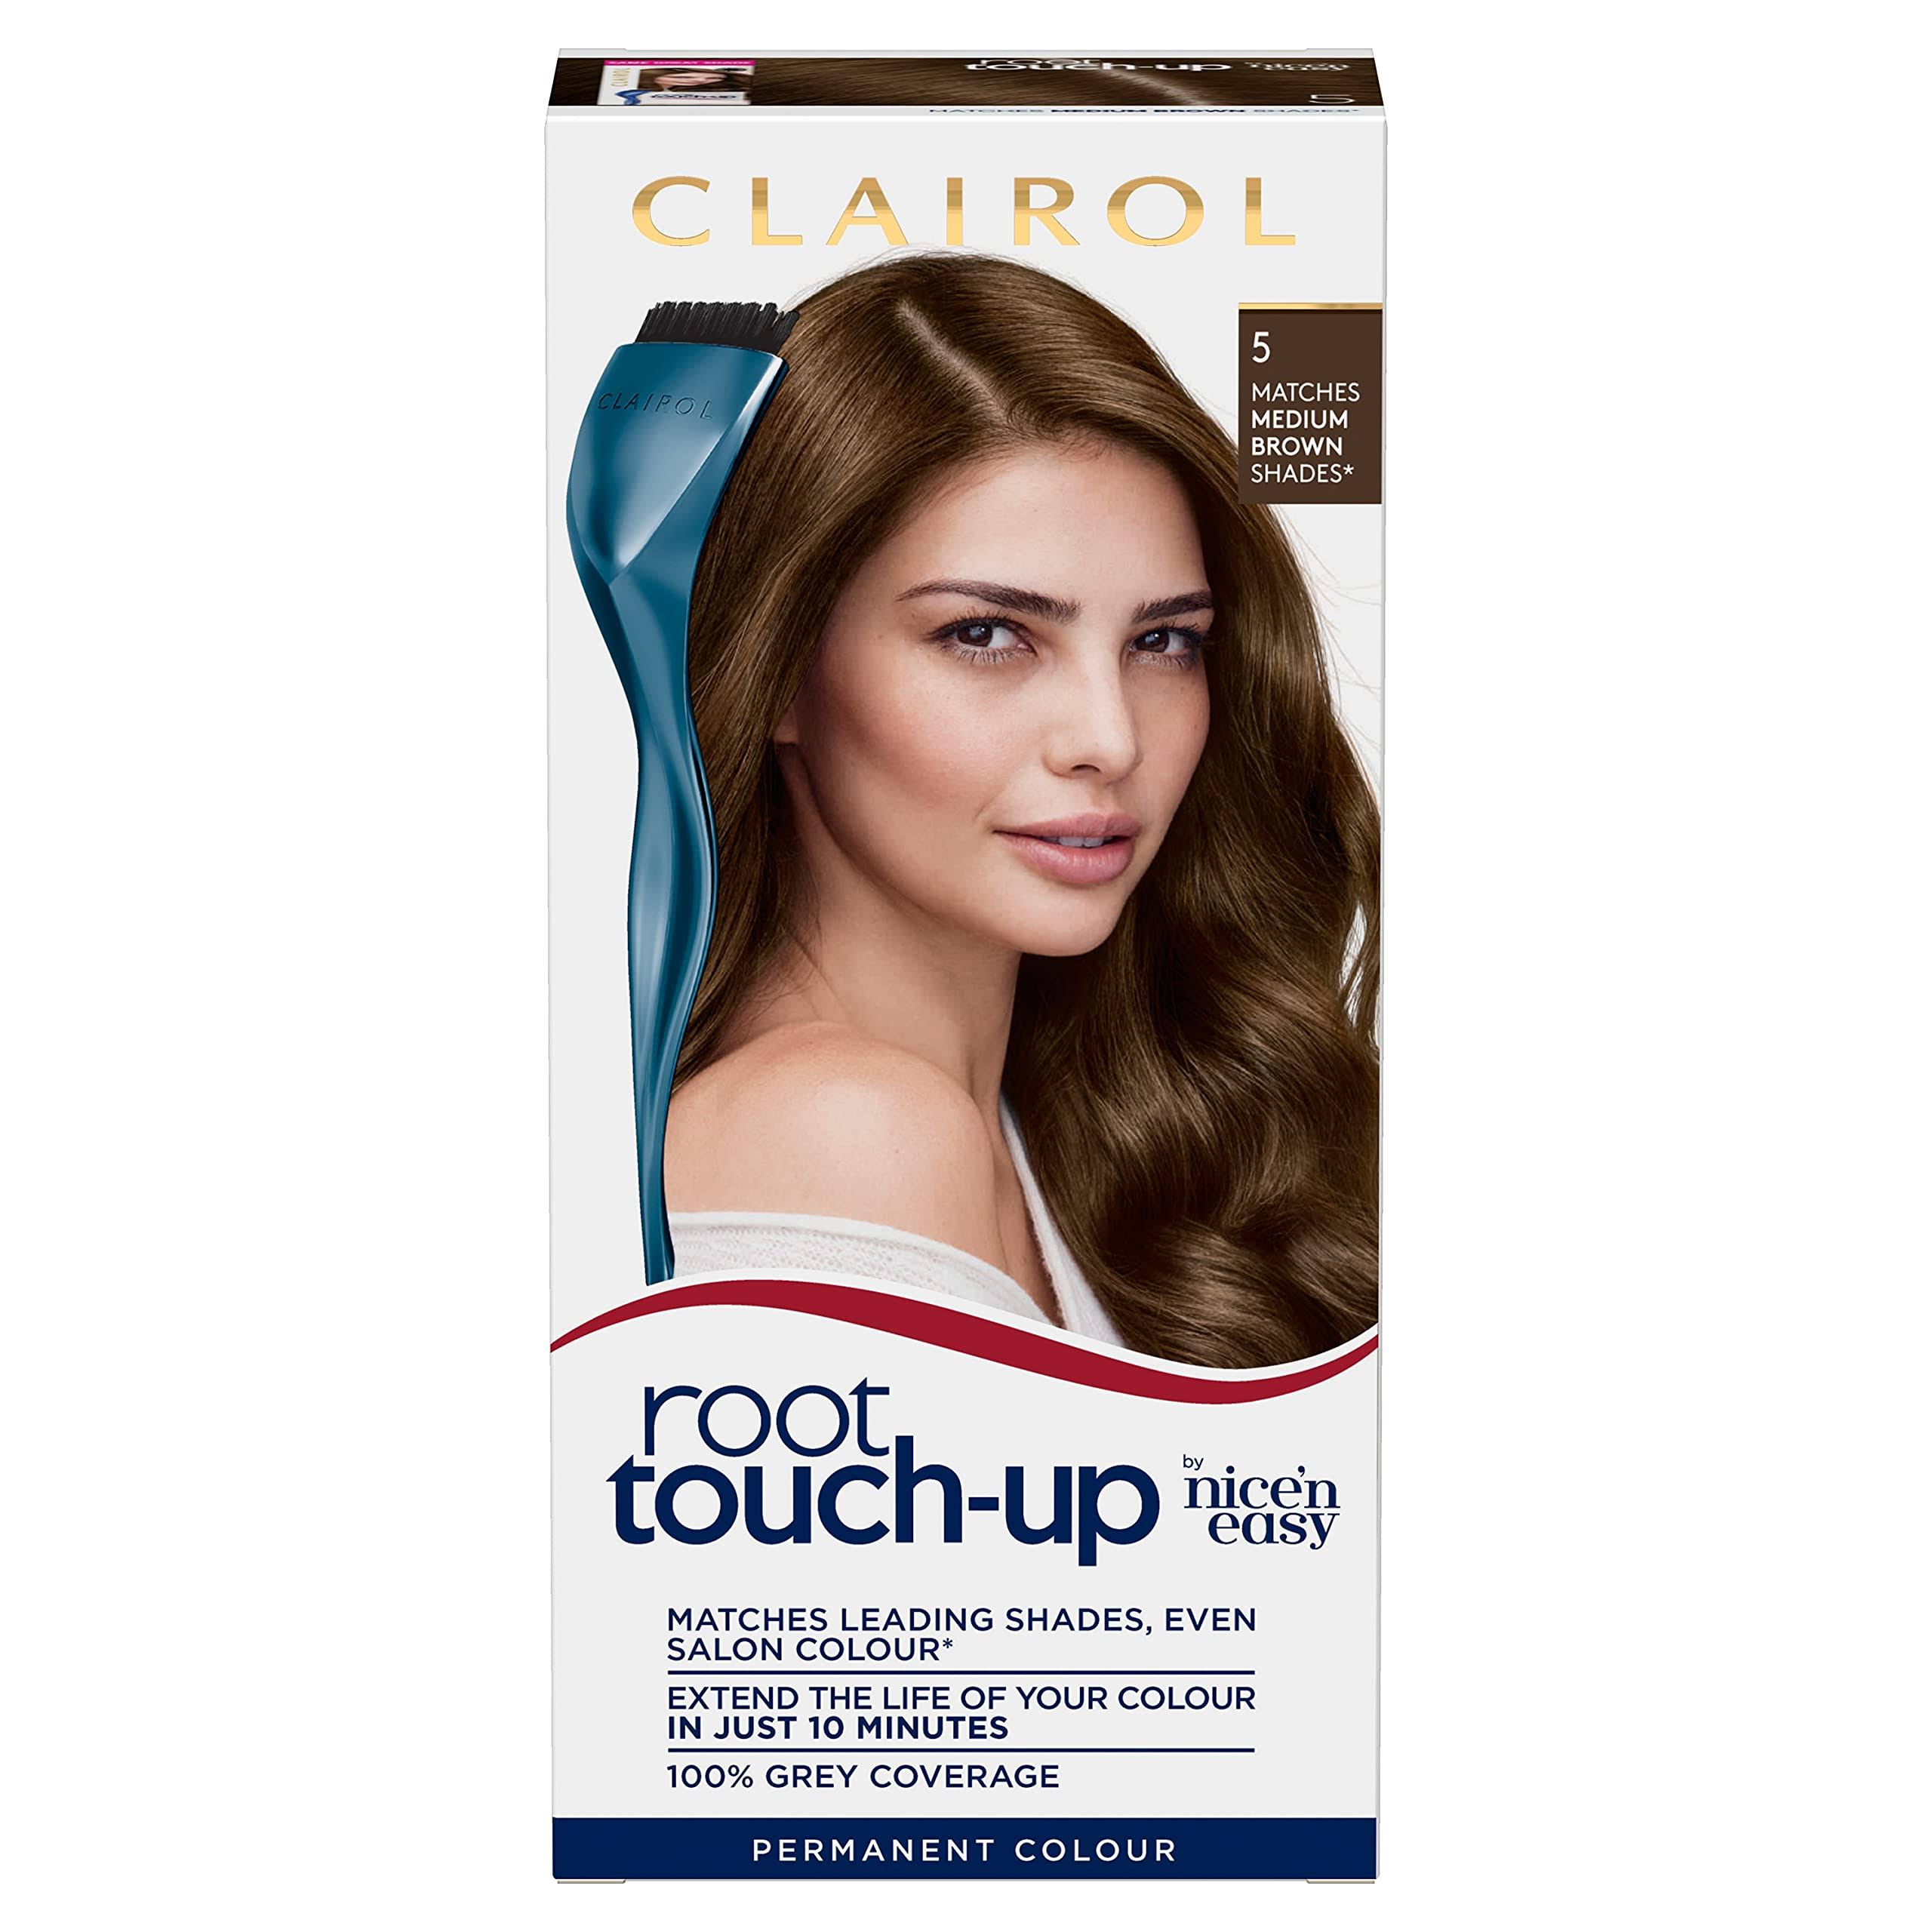 Clairol Root Touch Up Hair Dye - 5 Medium Brown